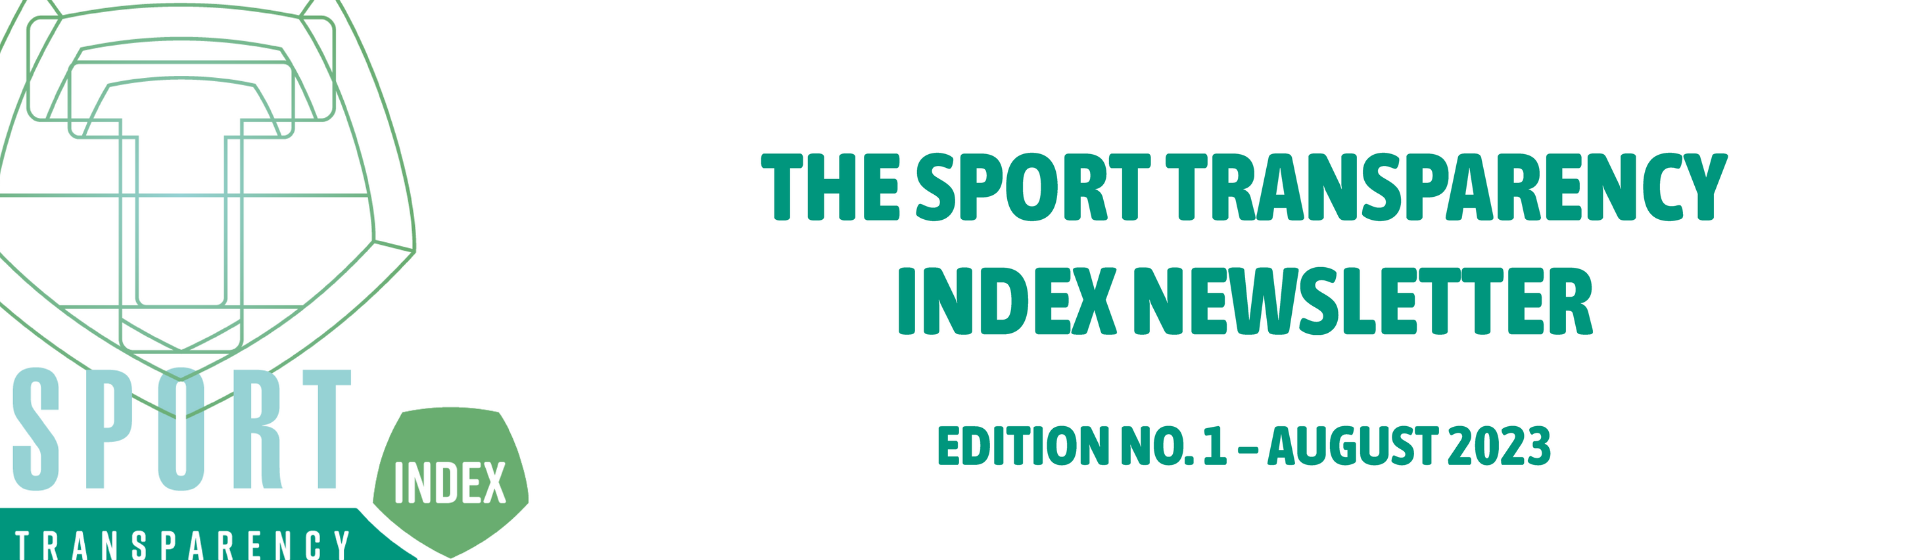 The Sport Transparency Index Newsletter – 1st Edition header